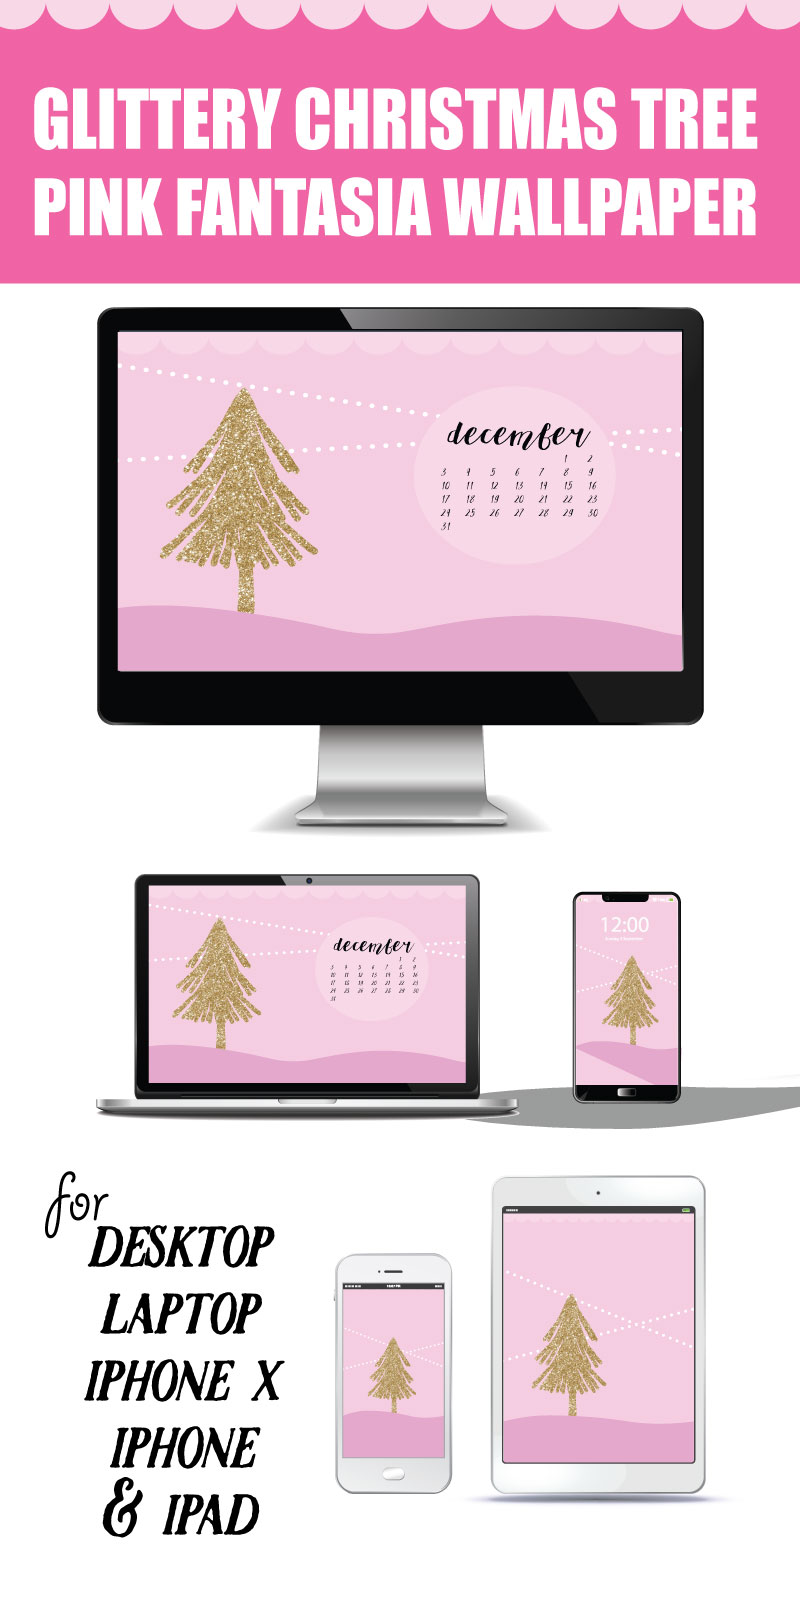 Deck Out Your Devices With This Free Glittery Tree - Glitter Christmas Wallpaper Pink - HD Wallpaper 